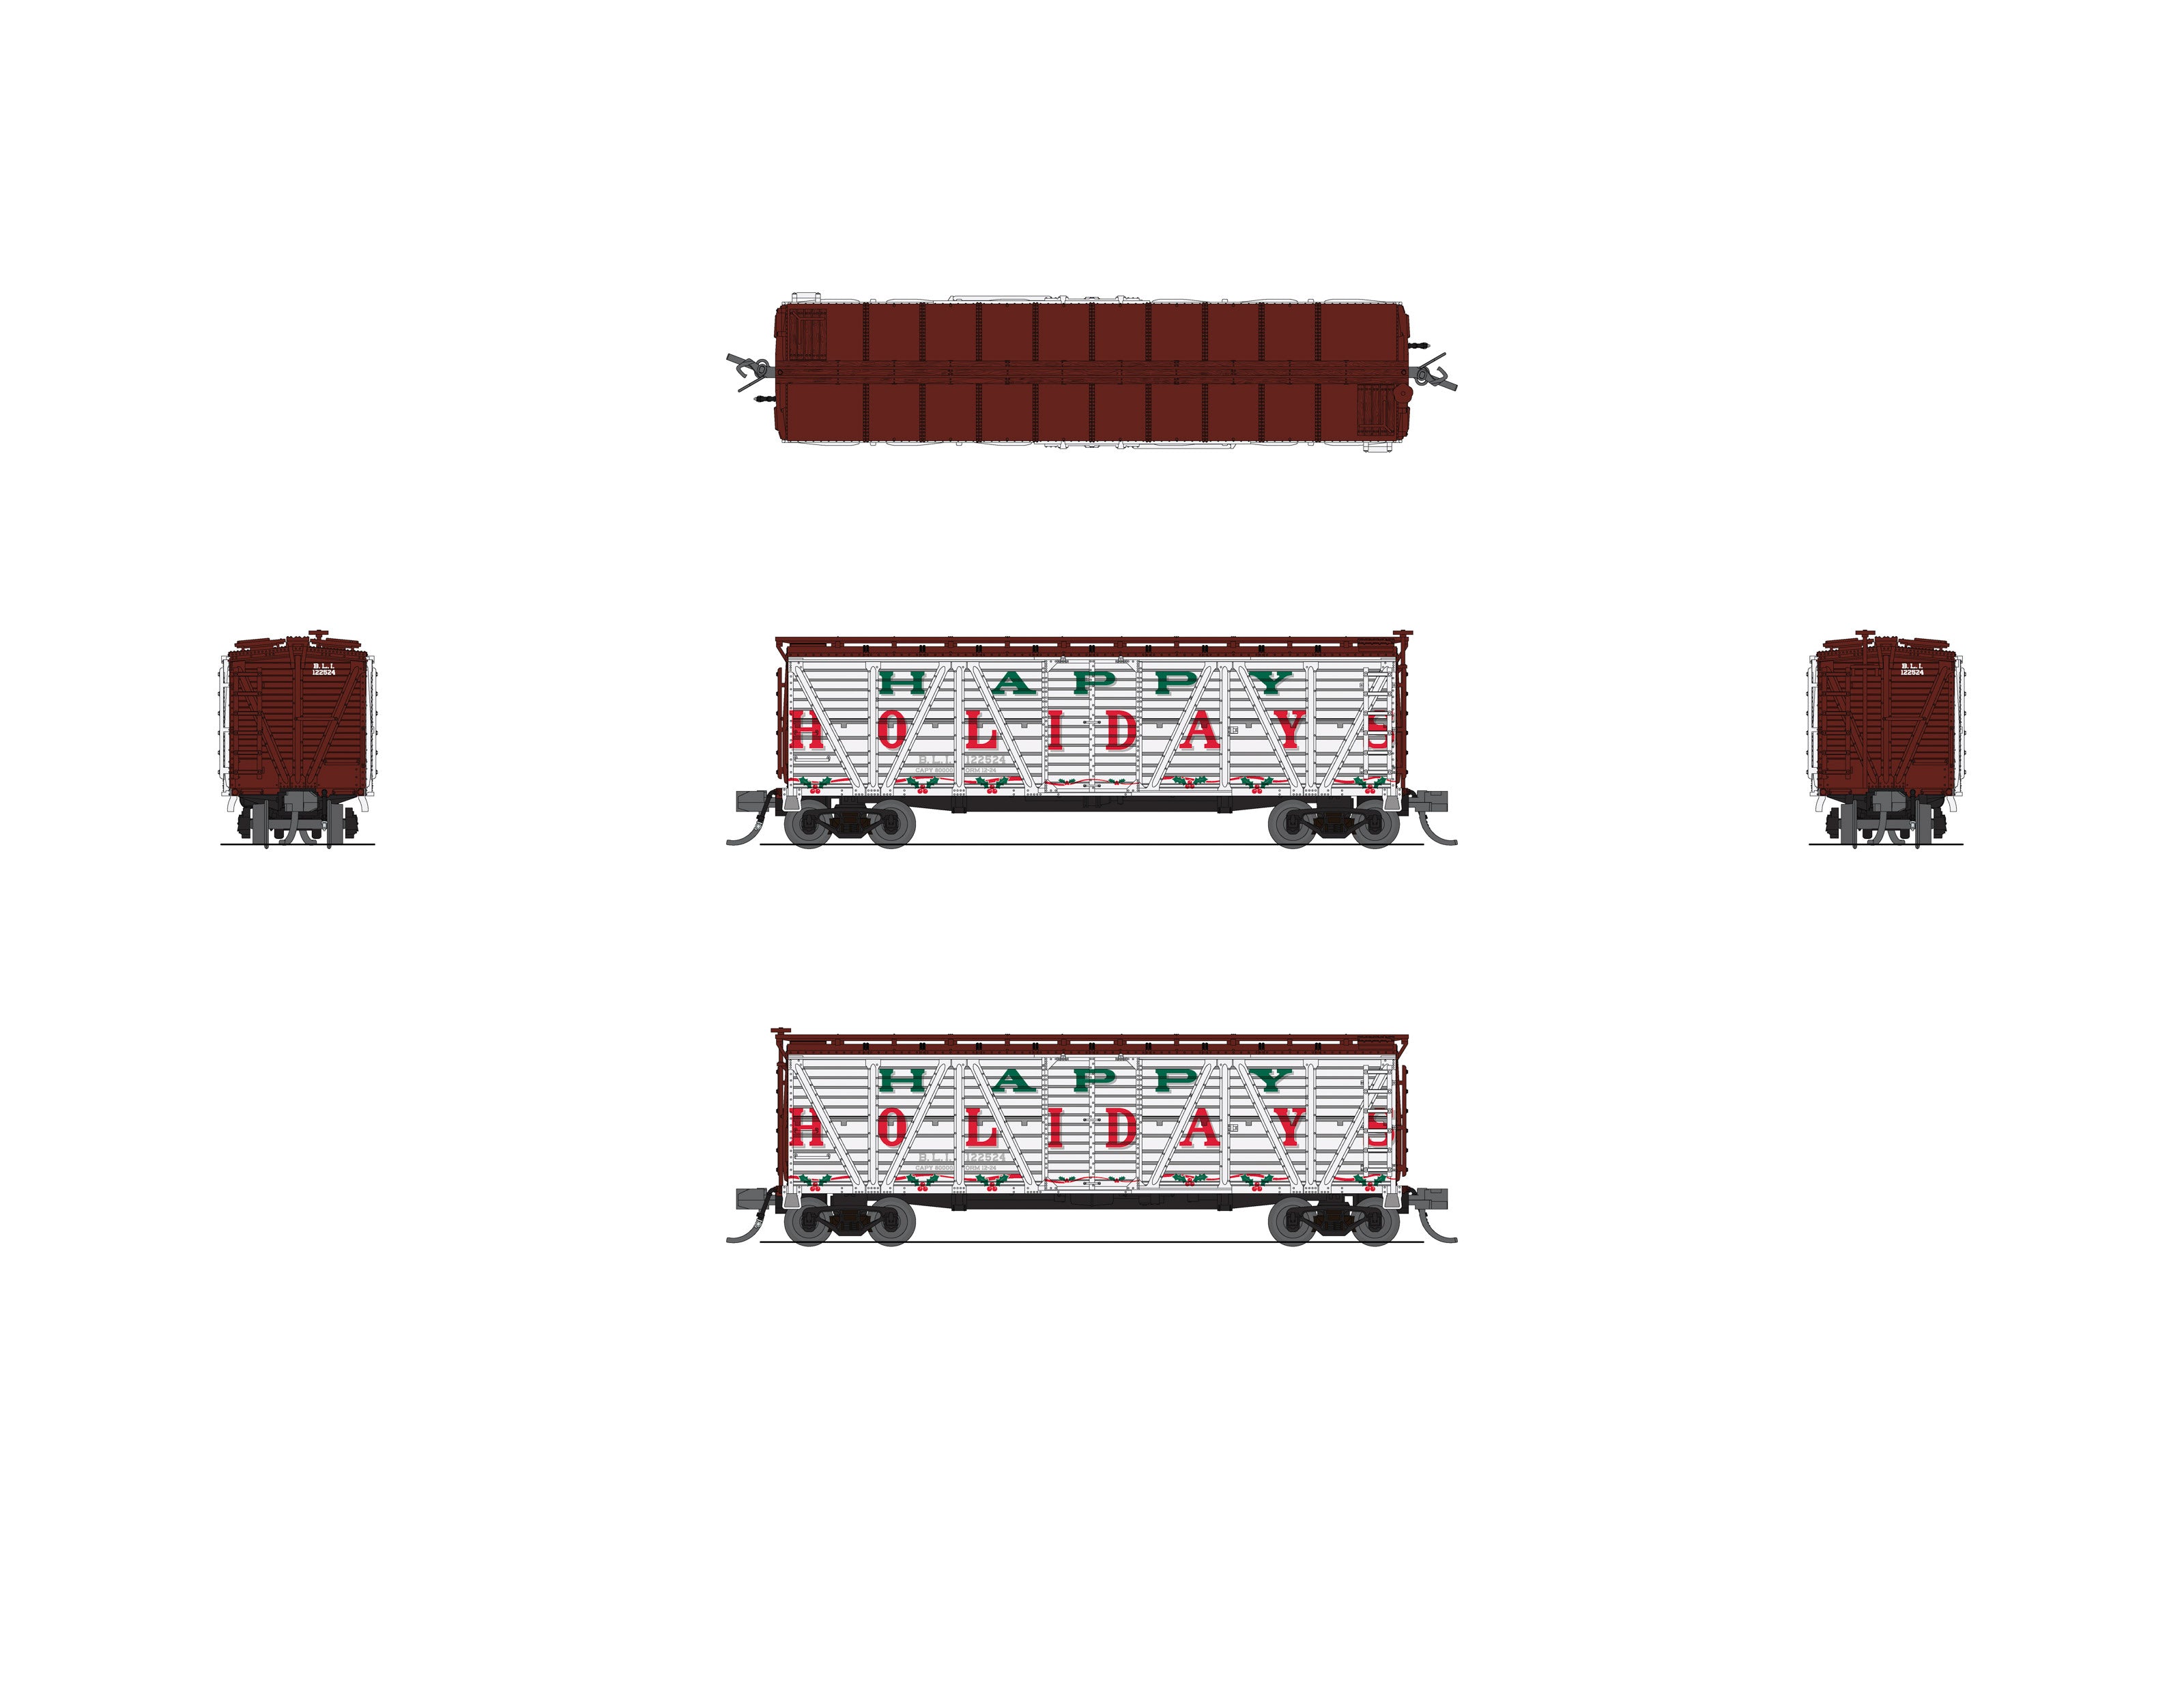 8489 40' Wood Stock Car, Holiday Season Stock Car, "Happy Holidays", No Sound, 2-pack, N Scale